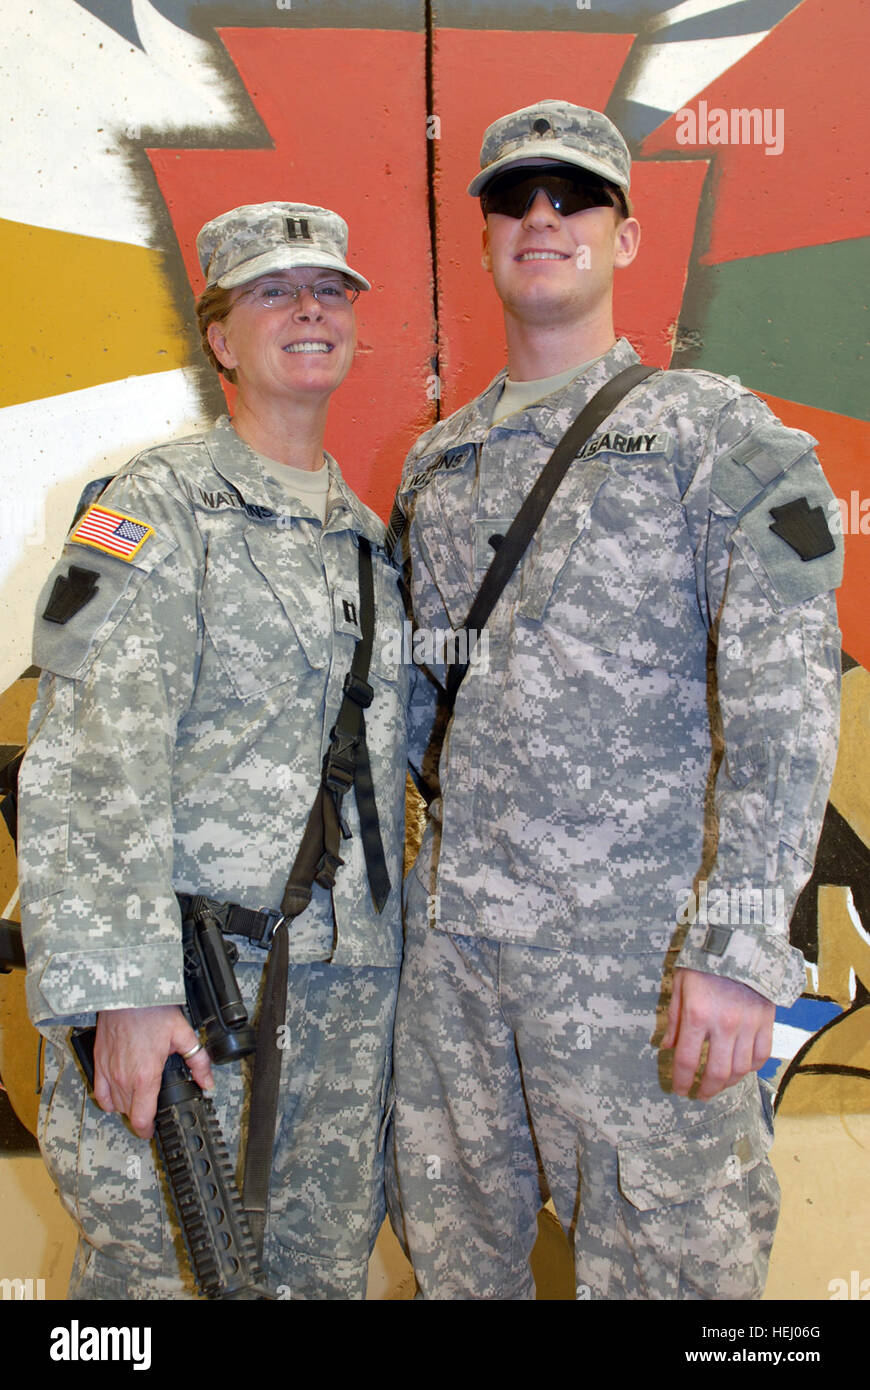 Capt. Dorothy Watkins and Spc. Joshua Watkins, both of Hazleton, Pa., are deployed to Camp Taji, a base camp north of Baghdad, with the 56th Stryker Brigade Combat Team, 28th Infantry Division, Pennsylvania National Guard. Capt. Watkins volunteered for the deployment so she could be with her son. Spc. Watkins is a cavalry scout assigned to A Troop, 2nd Battalion, 104th Cavalry Regiment. He joined the Army after his junior year of high school. Mother, son serve together in Iraq 185188 Stock Photo